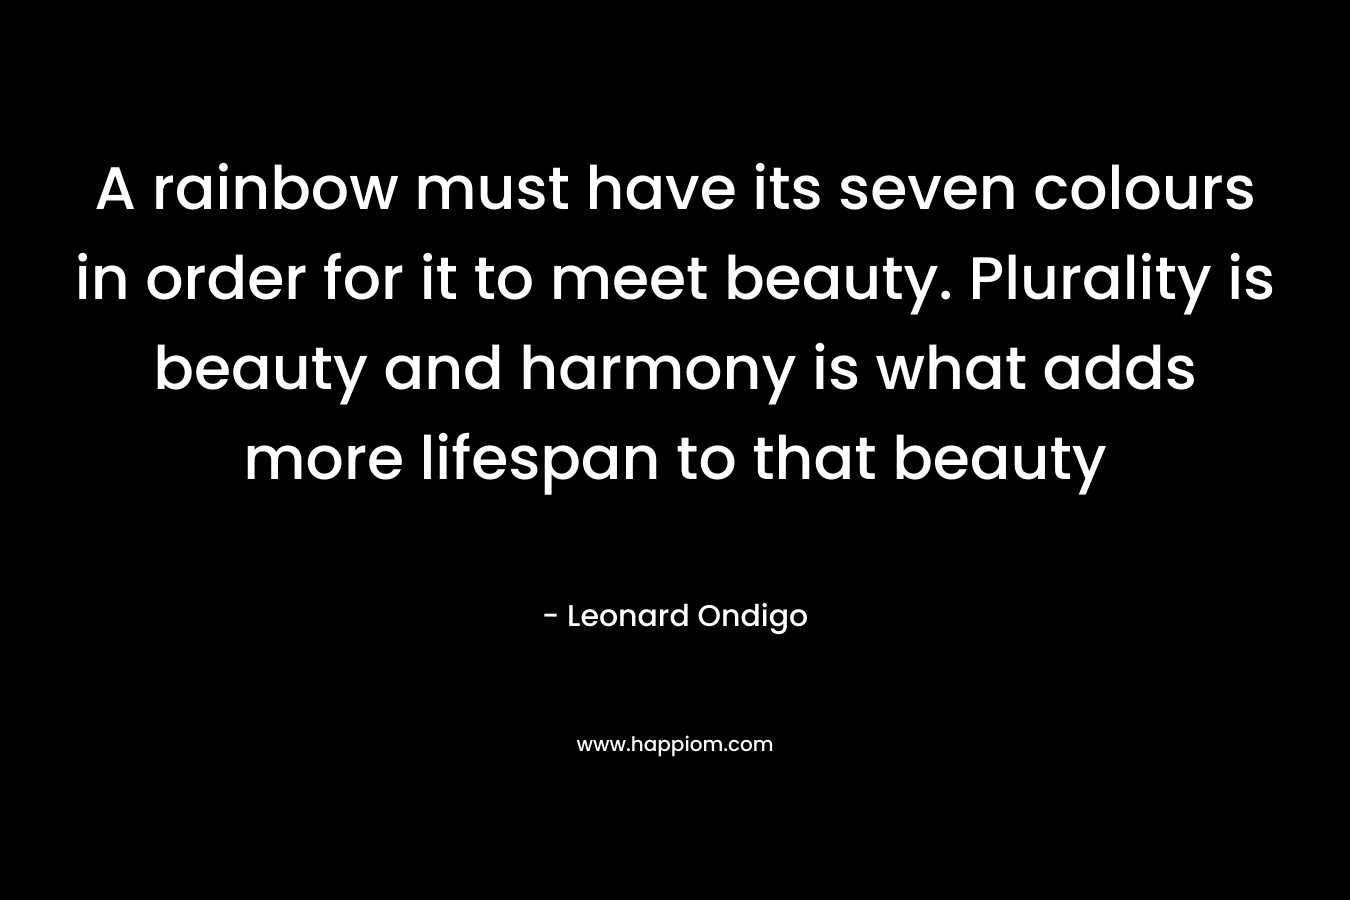 A rainbow must have its seven colours in order for it to meet beauty. Plurality is beauty and harmony is what adds more lifespan to that beauty